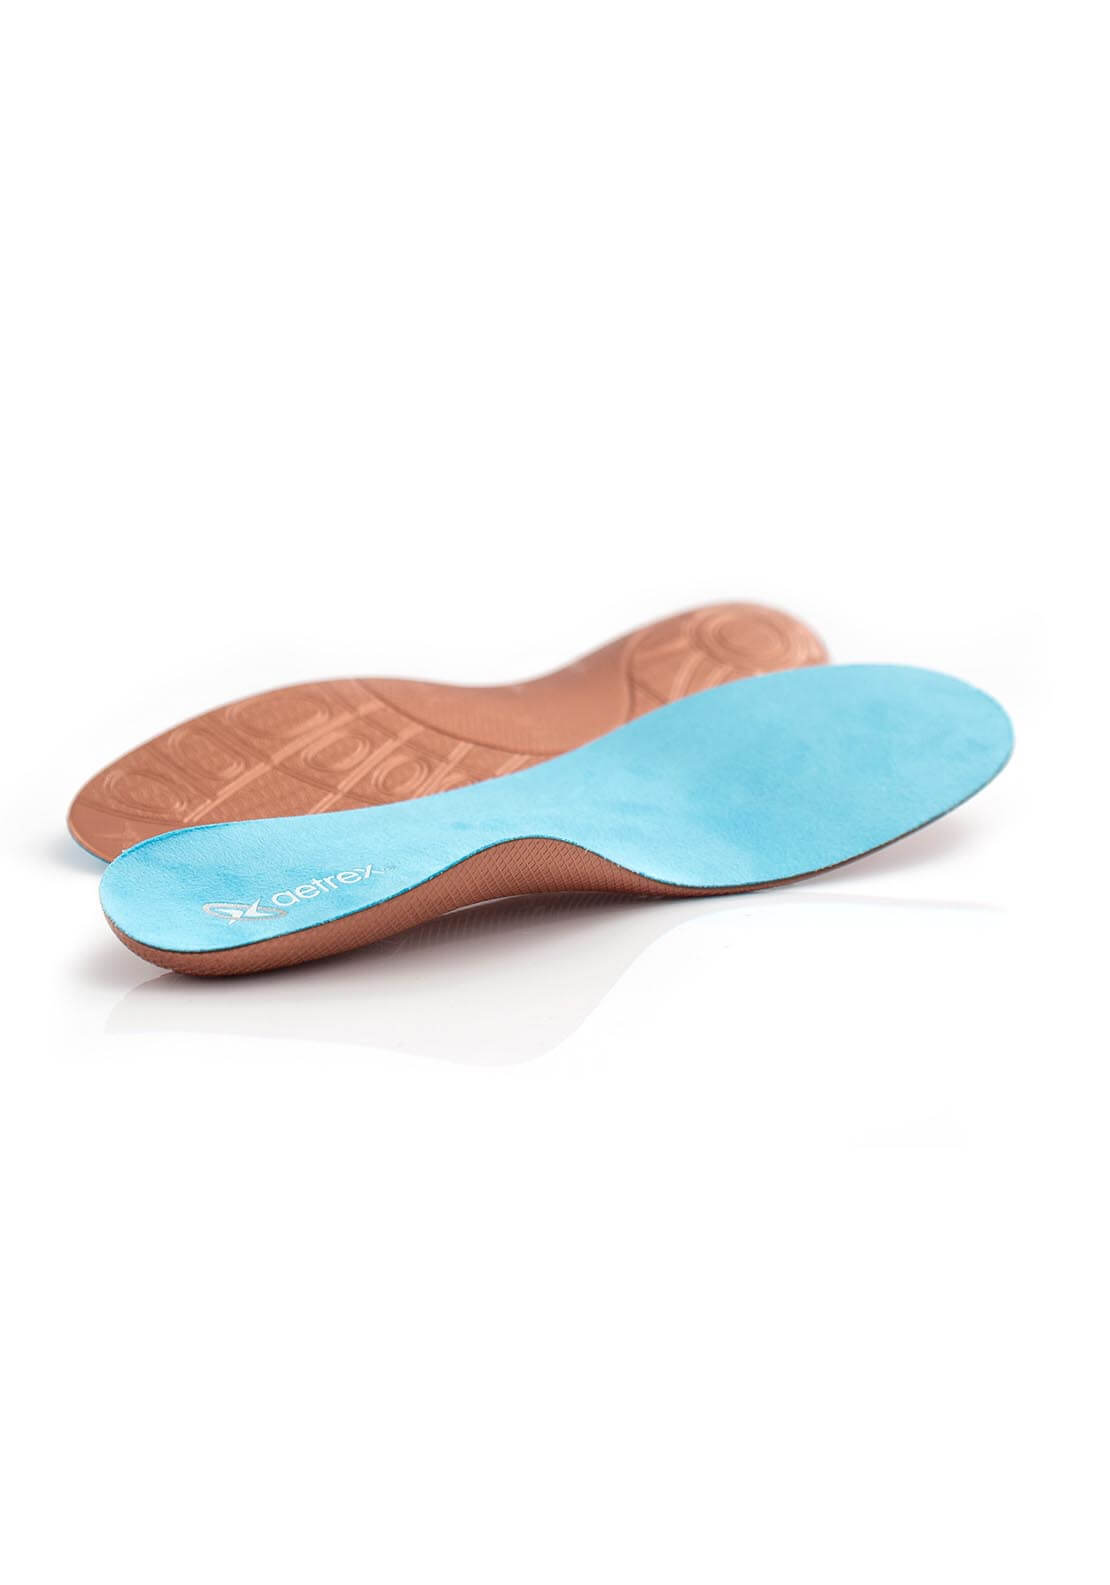 Aetrex Thinsoles Orthotics L1300 1 Shaws Department Stores